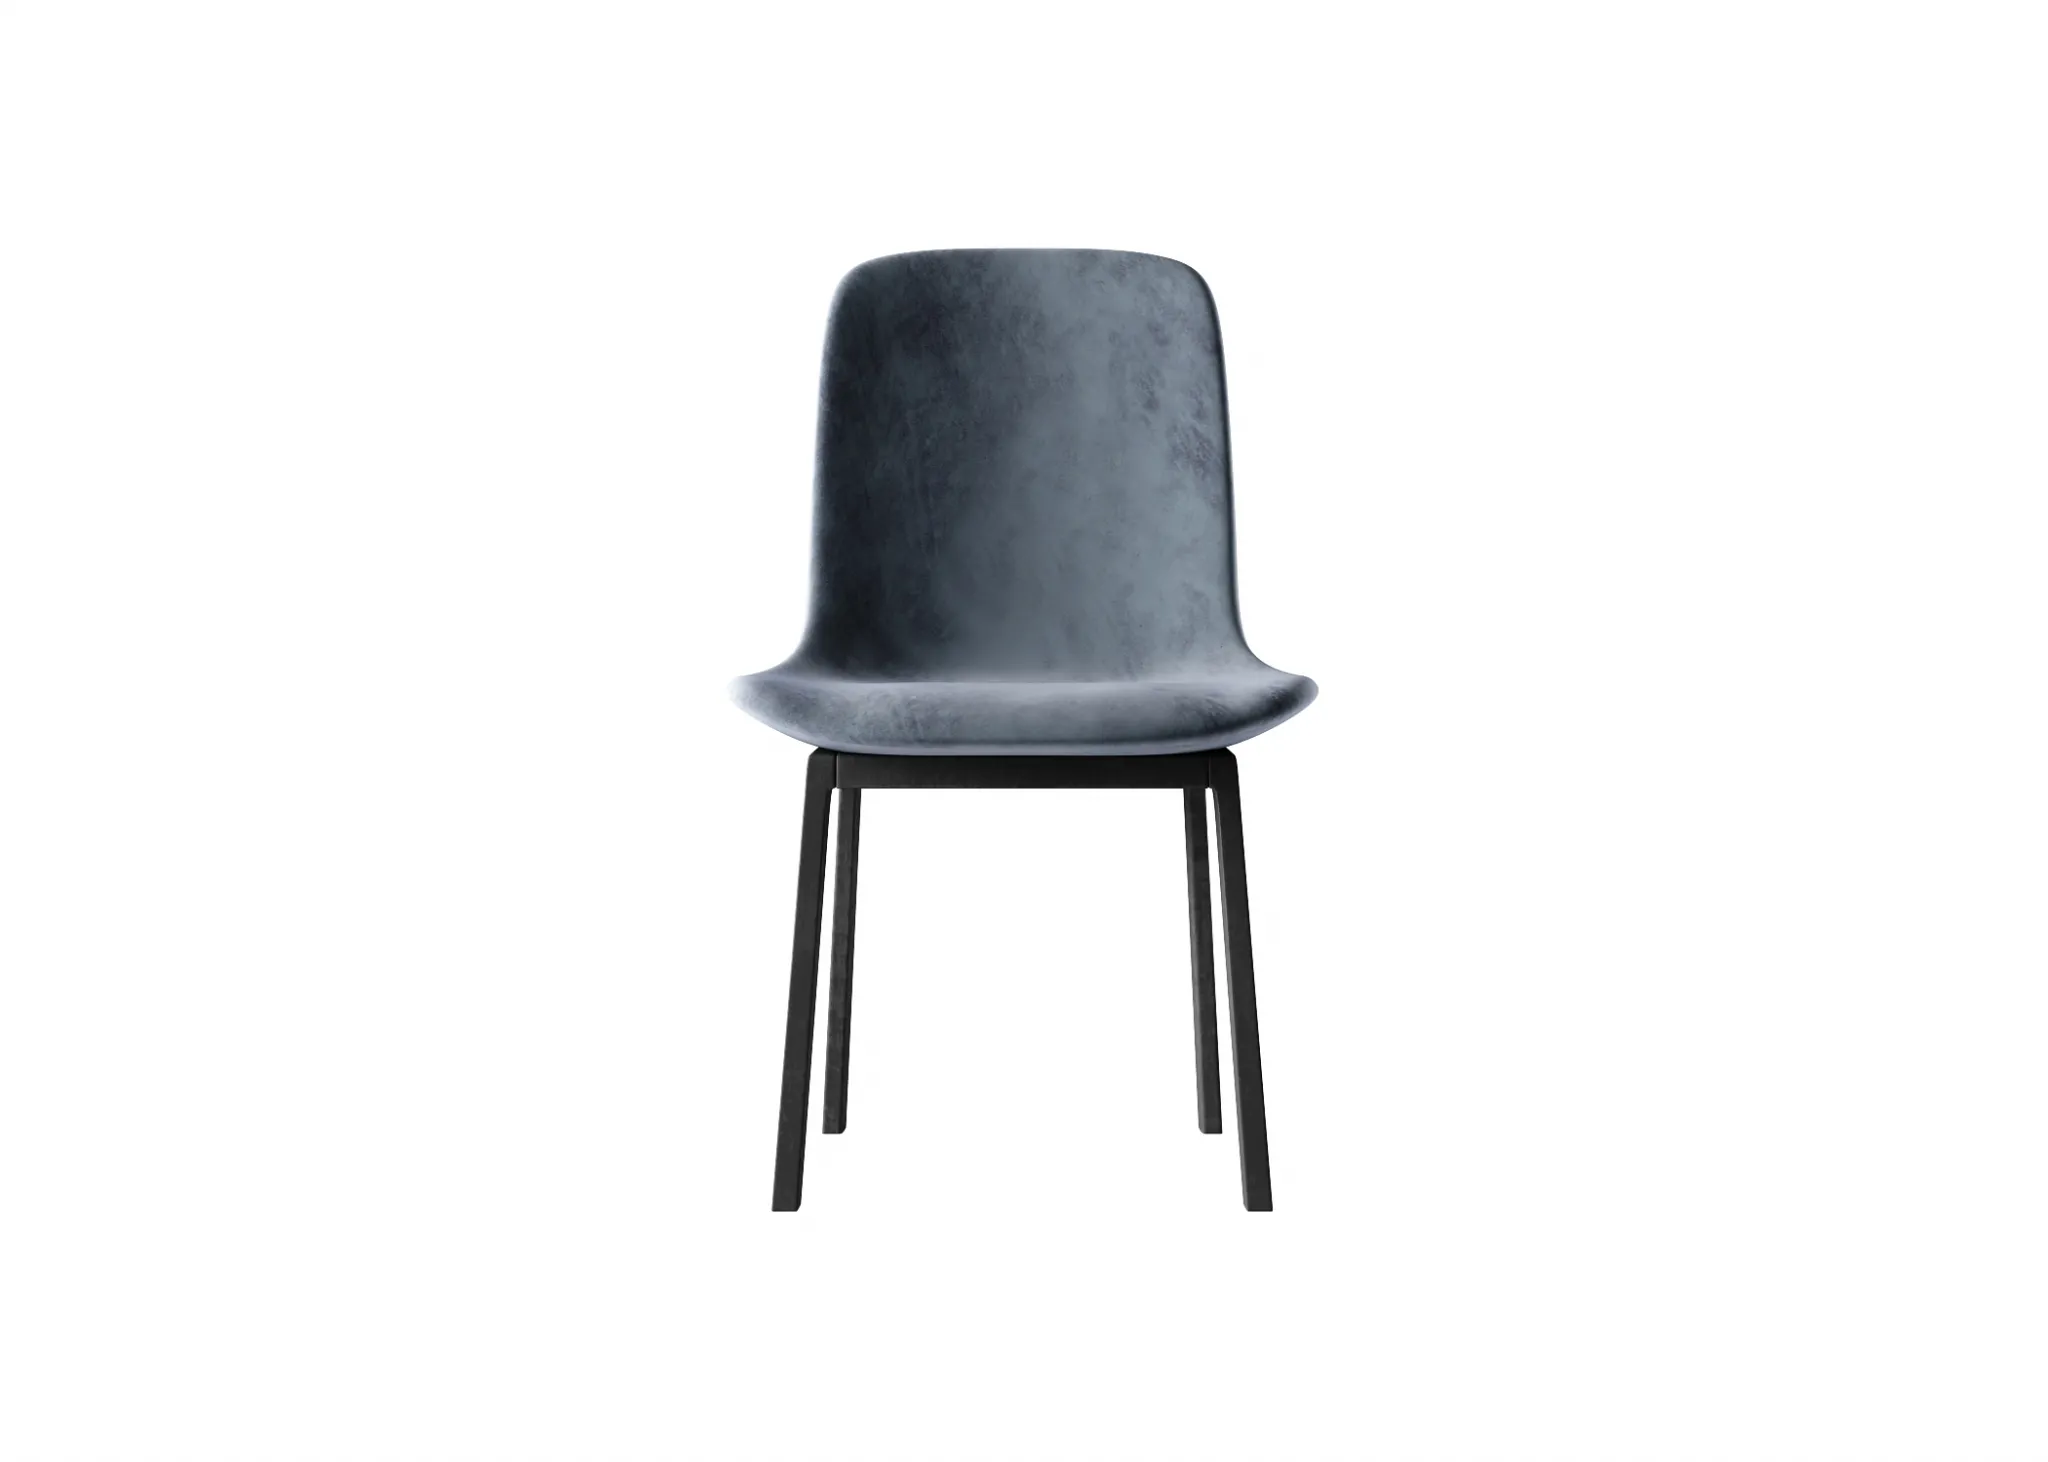 FURNITURE 3D MODELS – CHAIRS – 0487